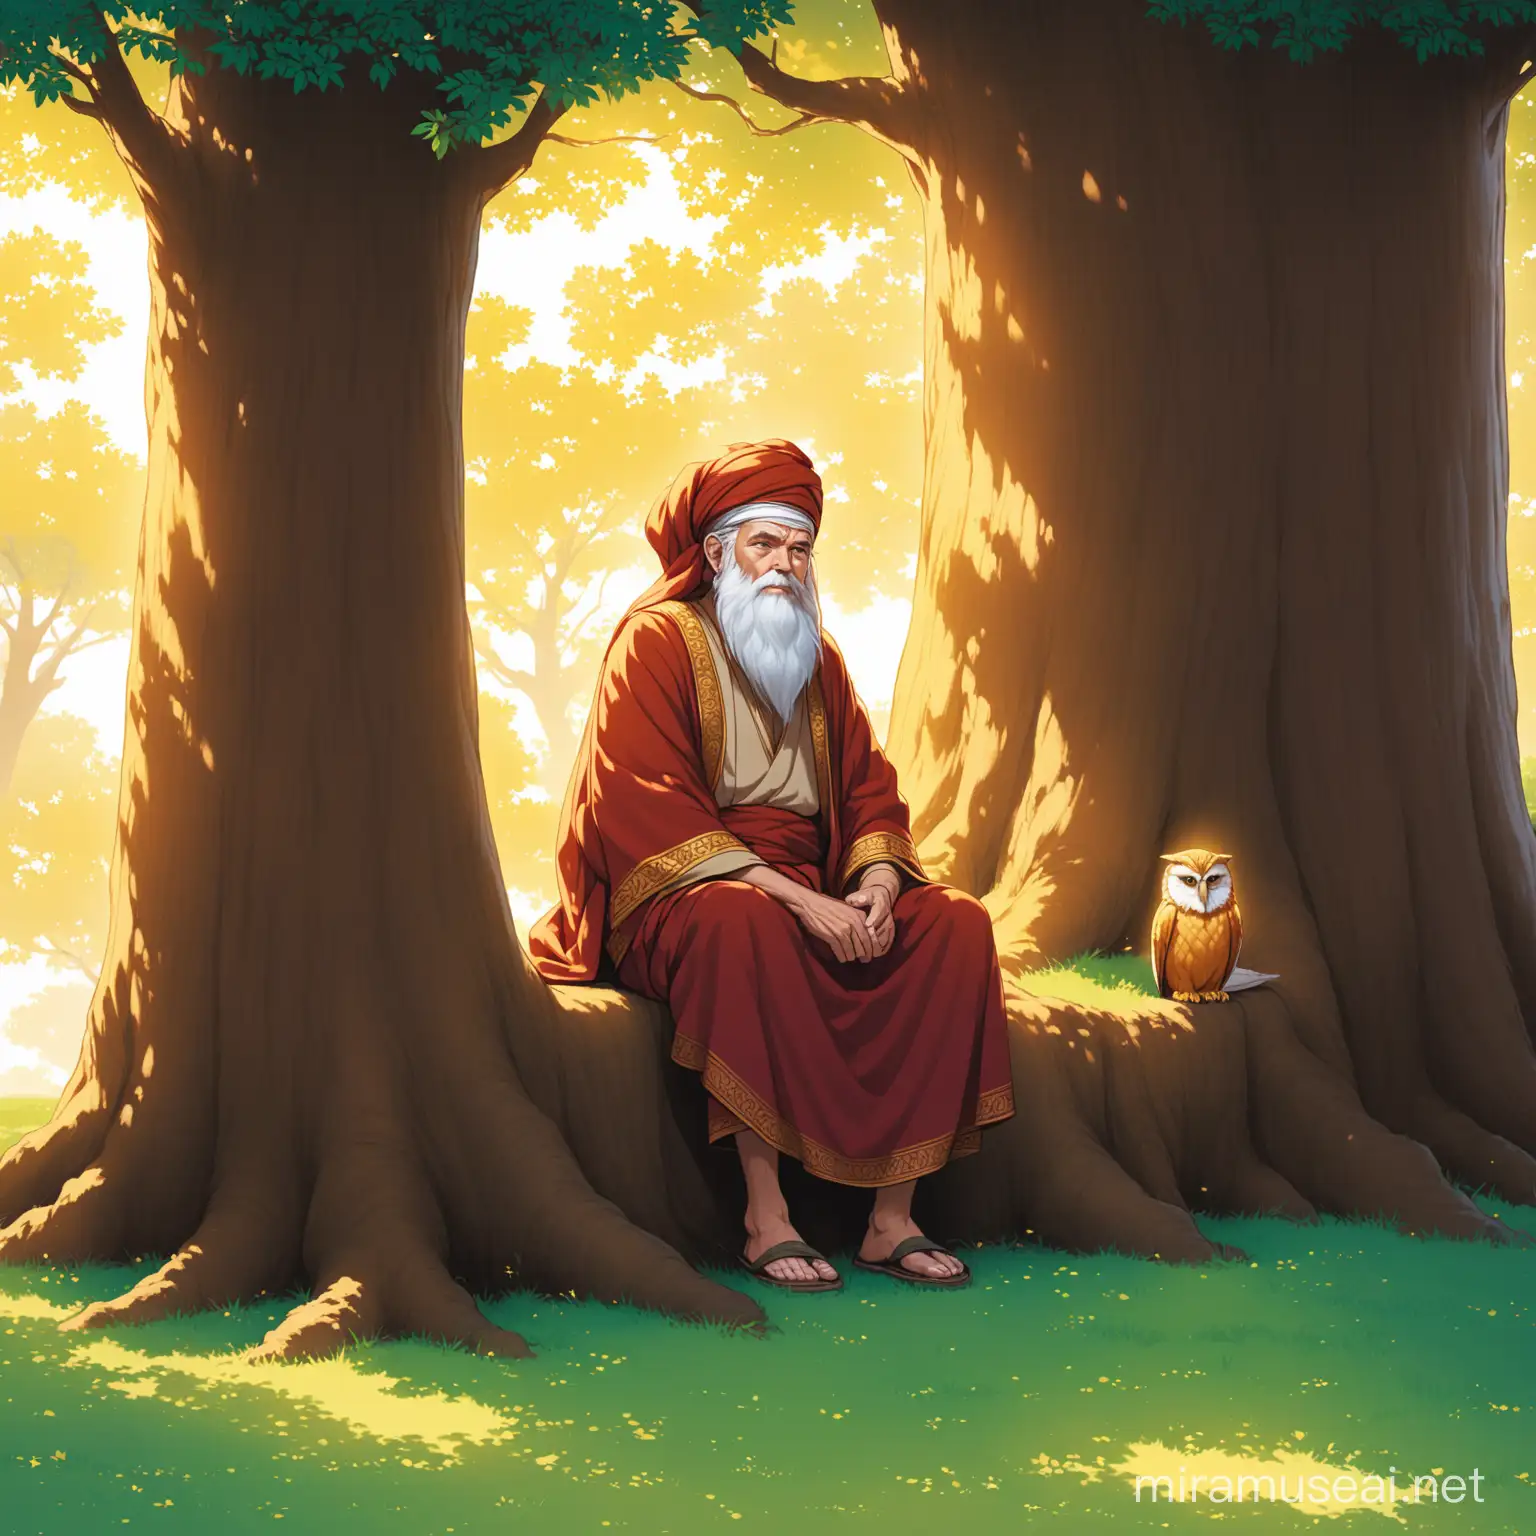 A wise man, sitting down under the tree